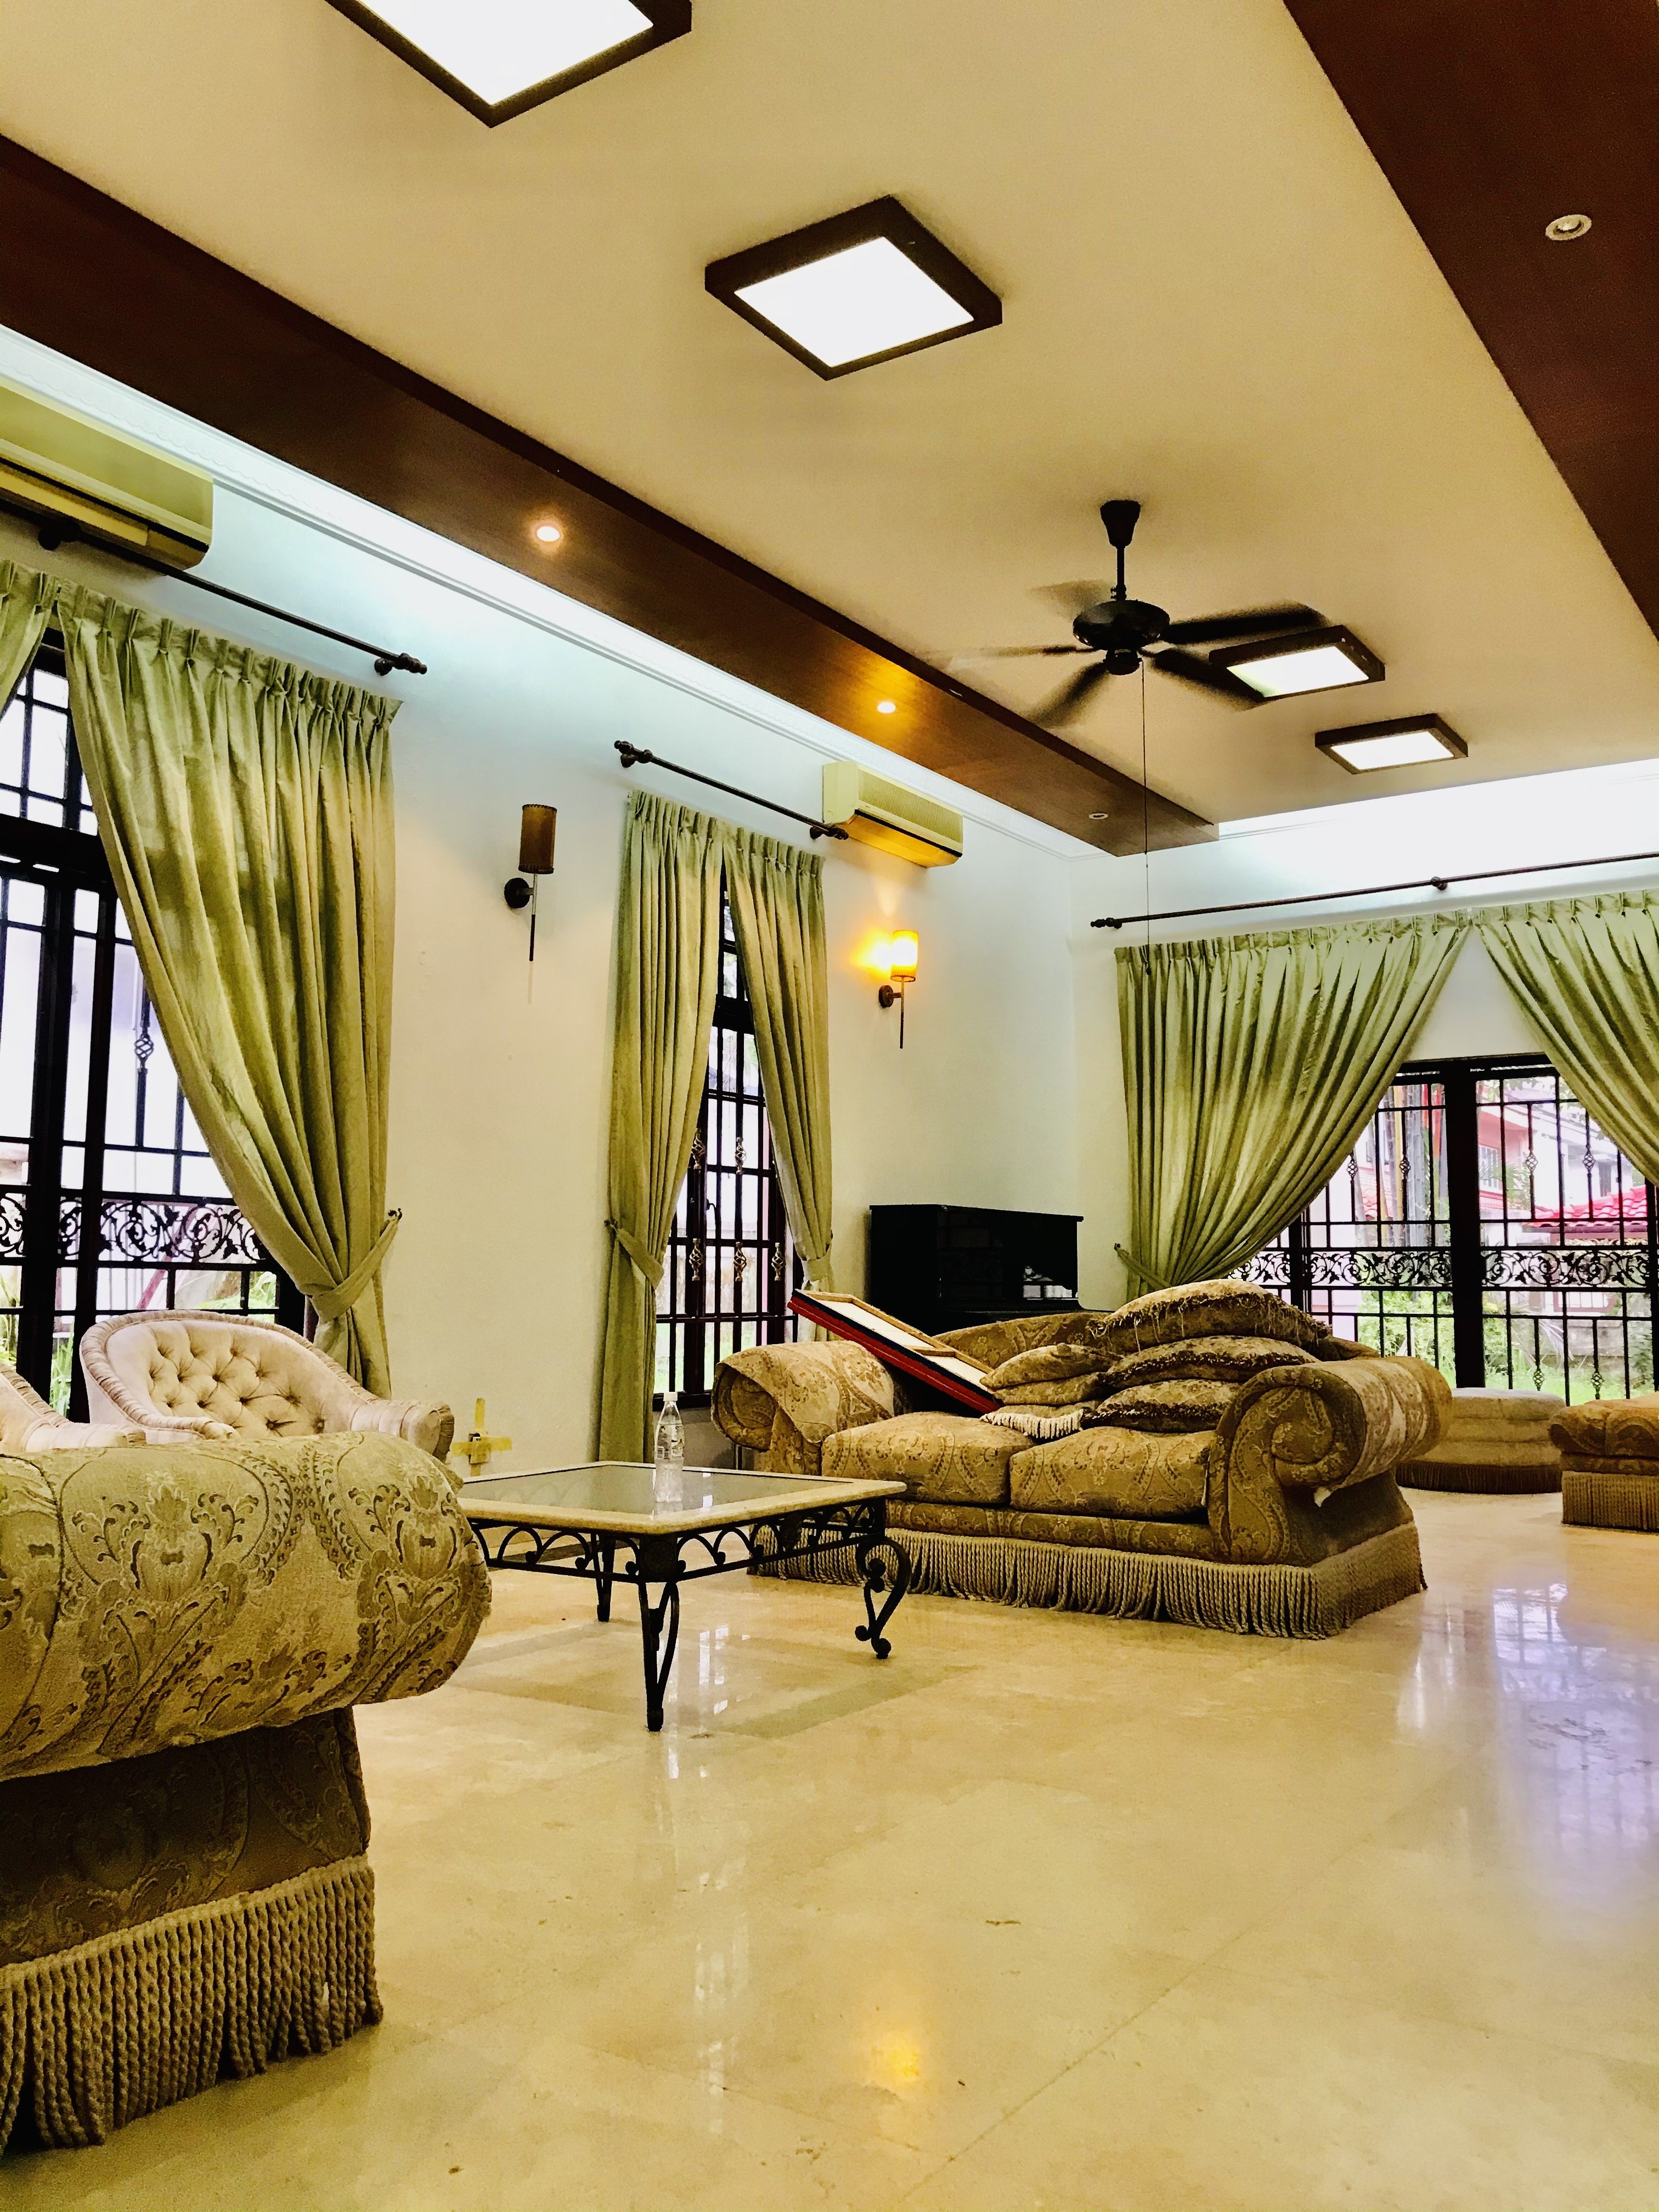 Renovated Link Bglw High Ceiling Guarded Gated